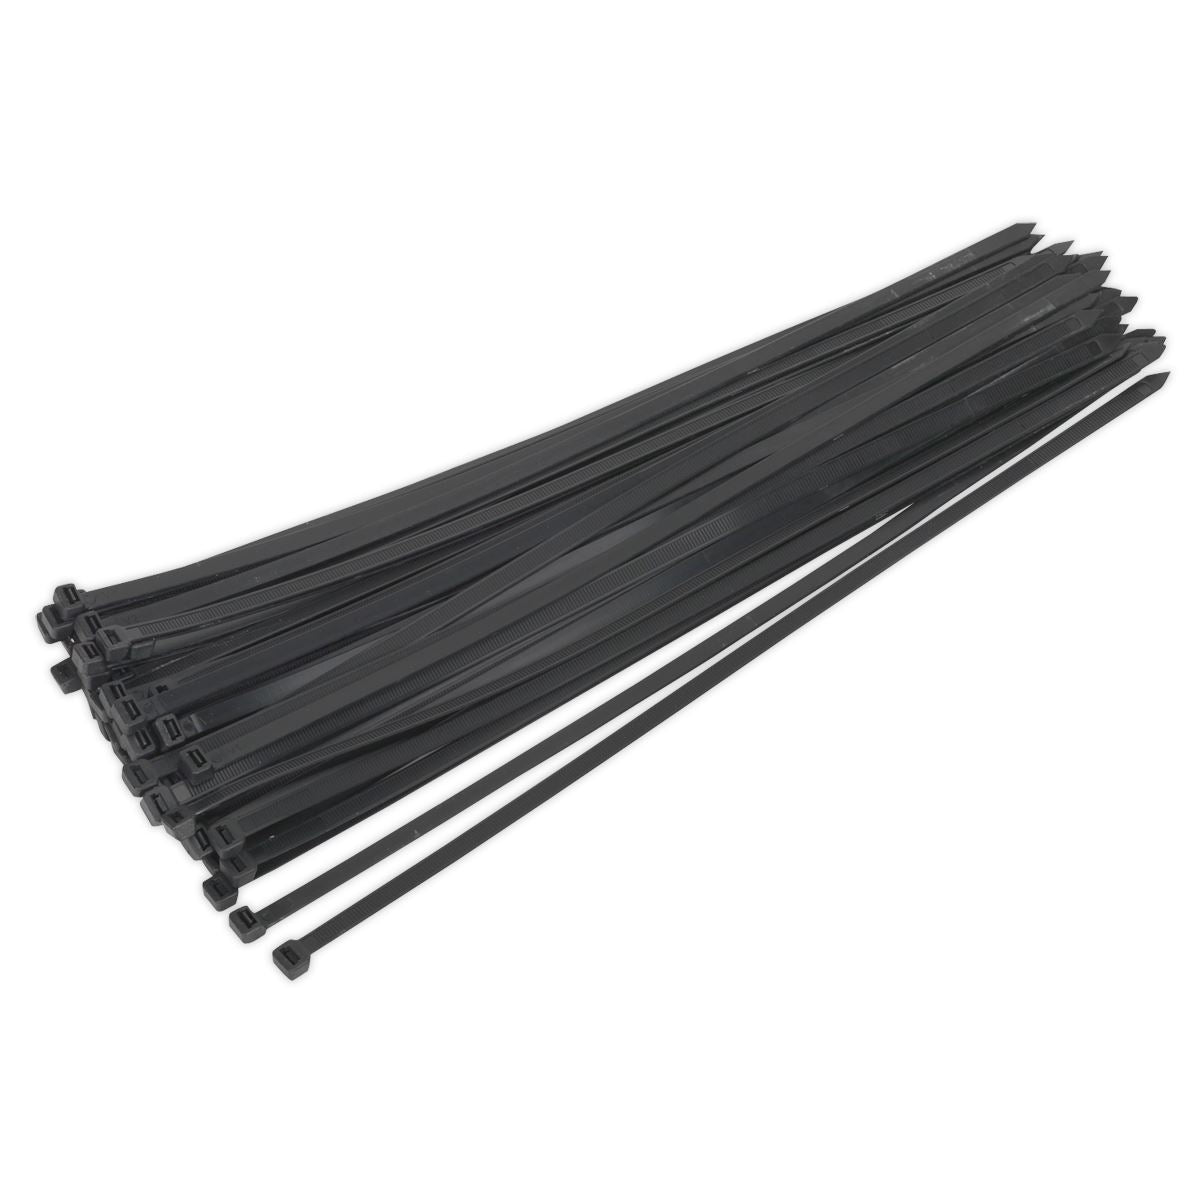 Sealey Cable Tie 650 x 12mm Black Pack of 50 CT65012P50